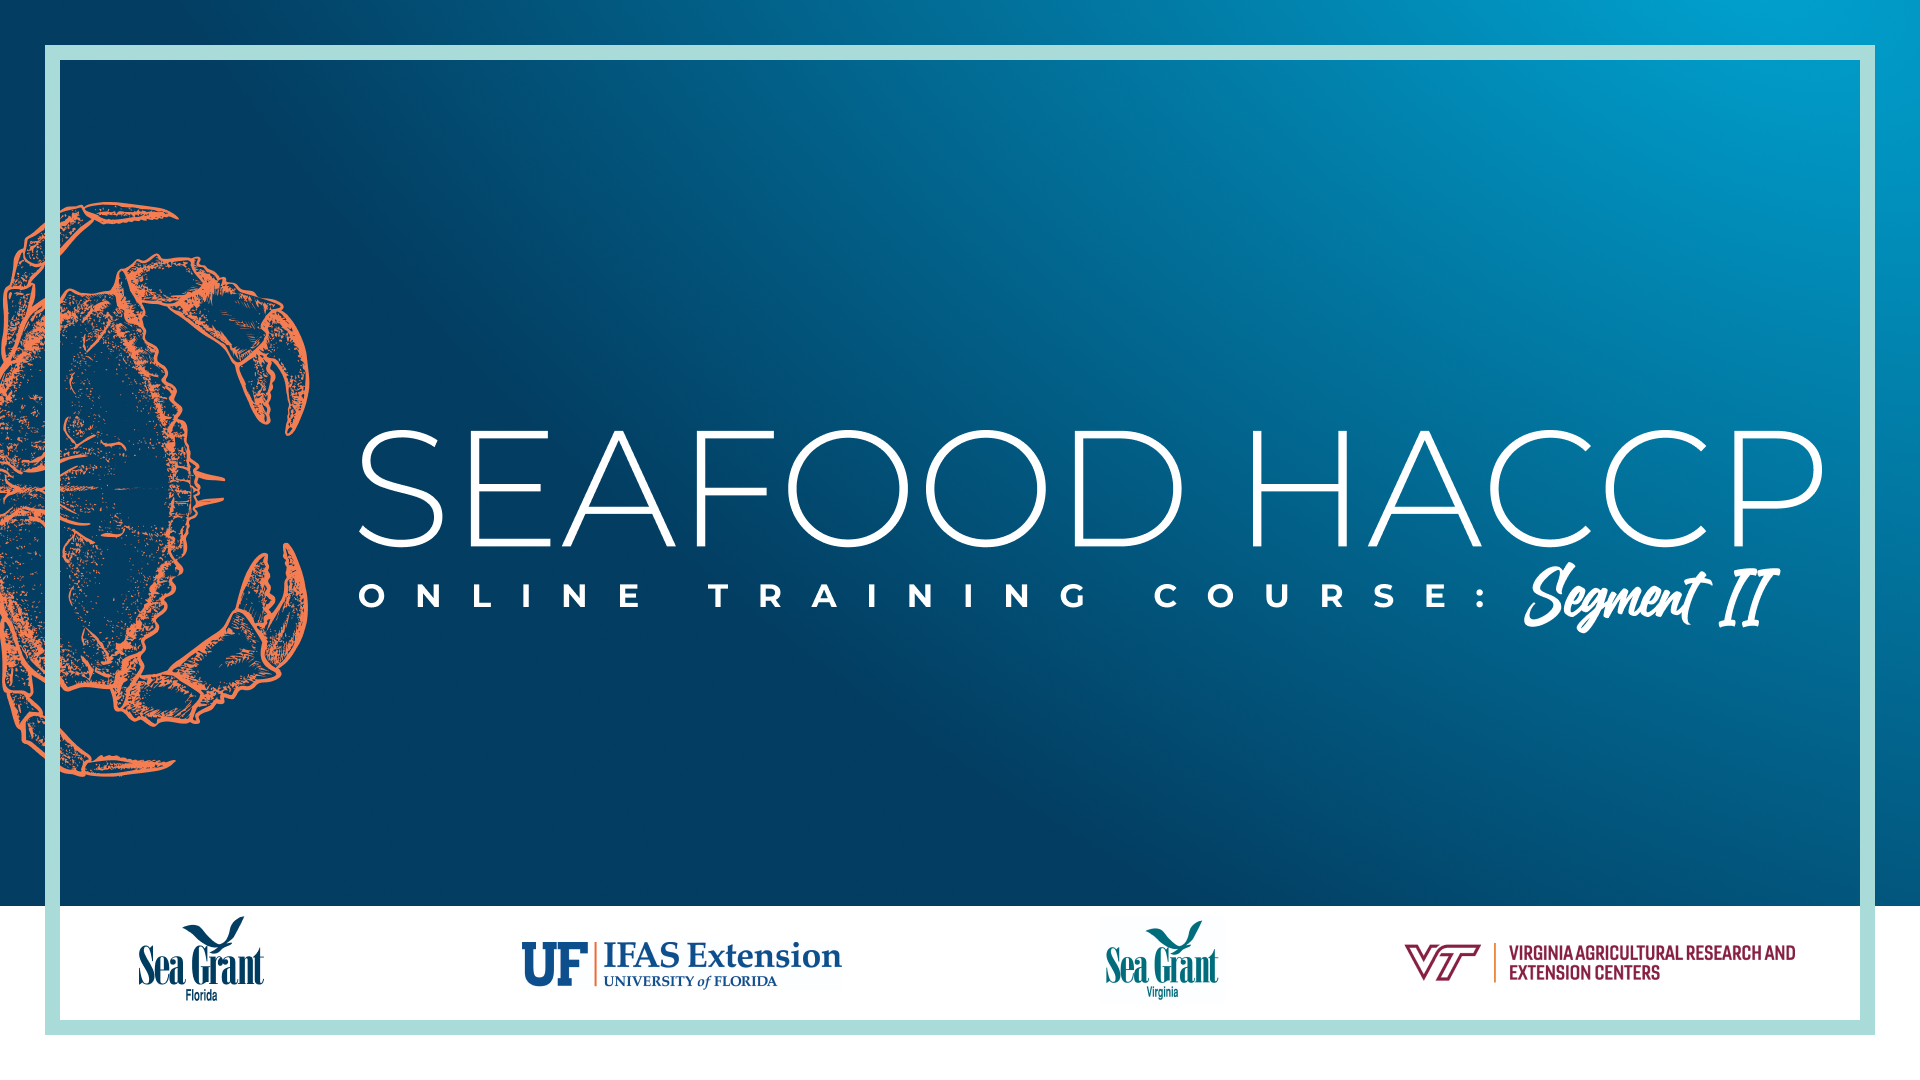 artistic graphic with the headline seafood haccp online train course segment II